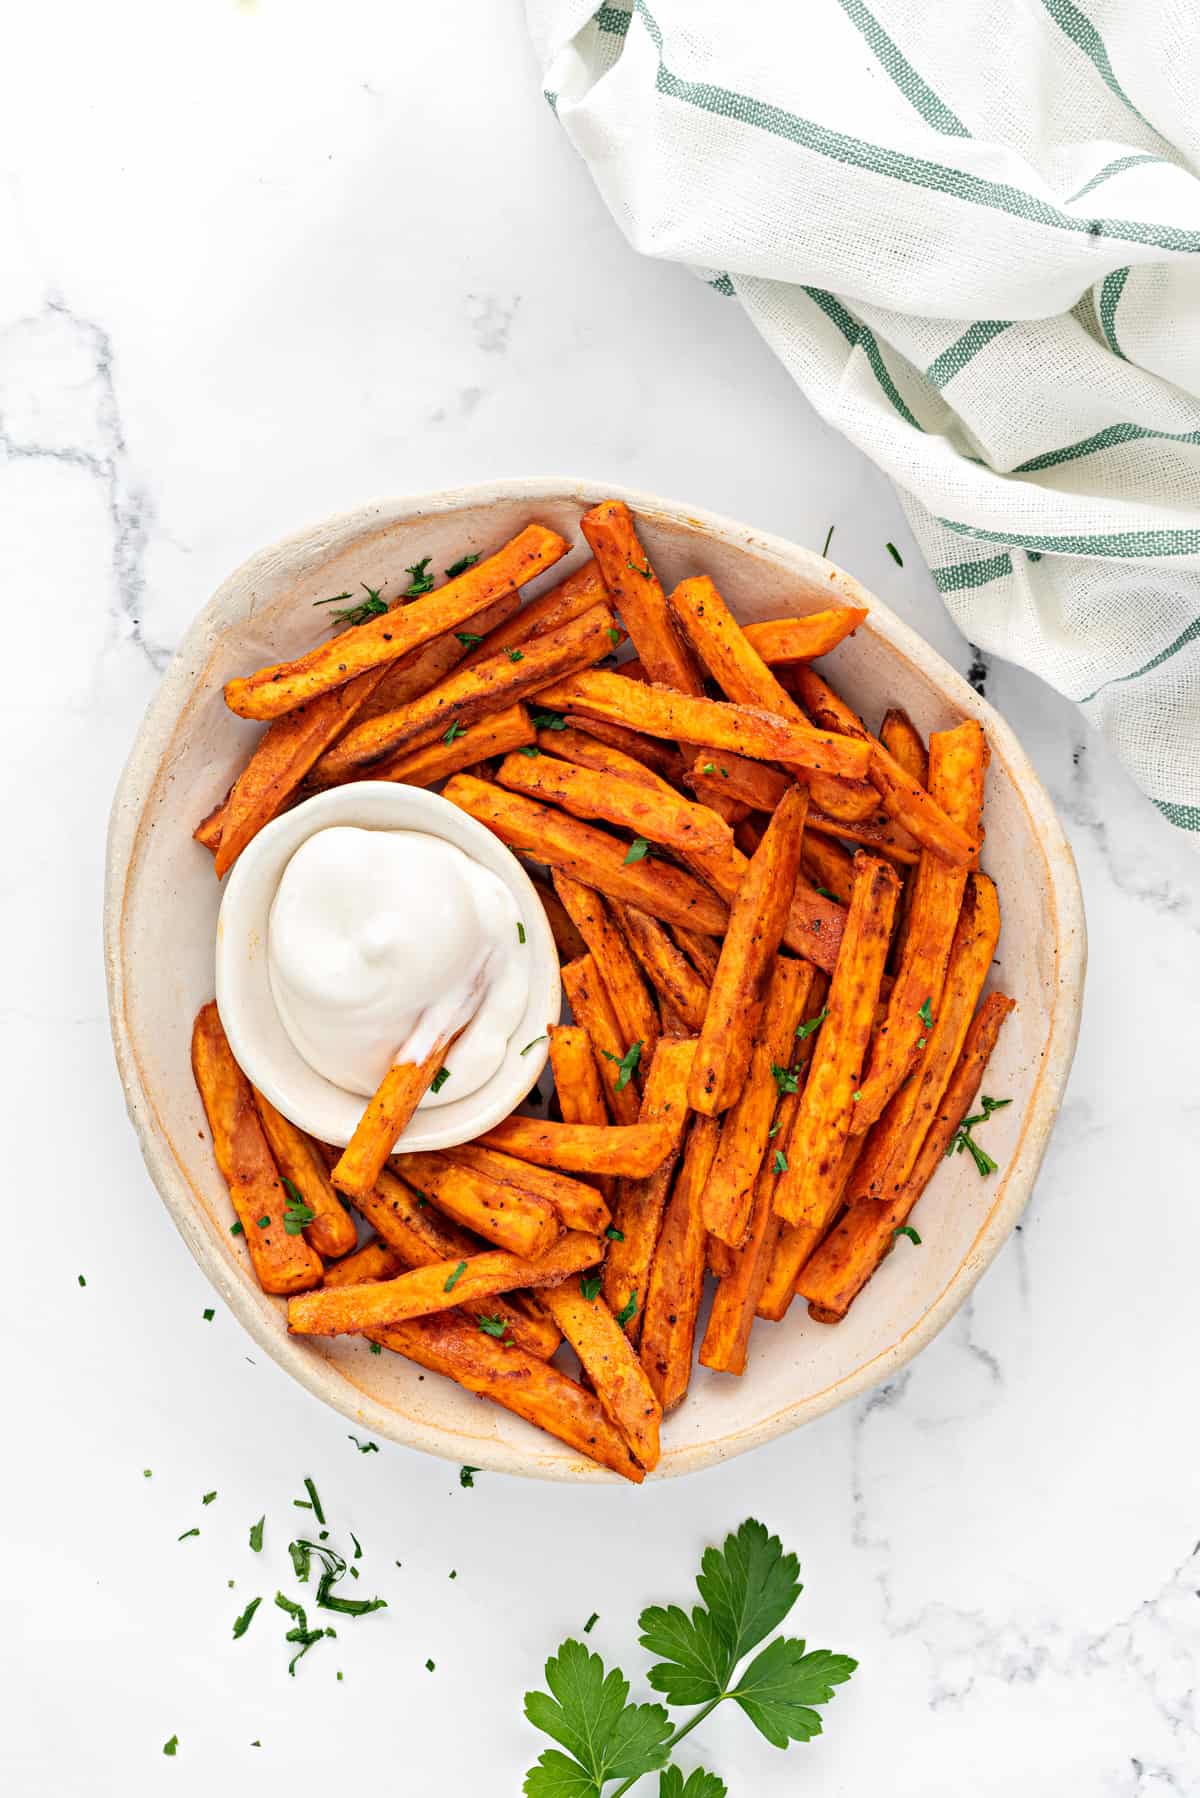 Oven baked sweet potato fries in a ceramic bowl with a small dipping bowl of aioli